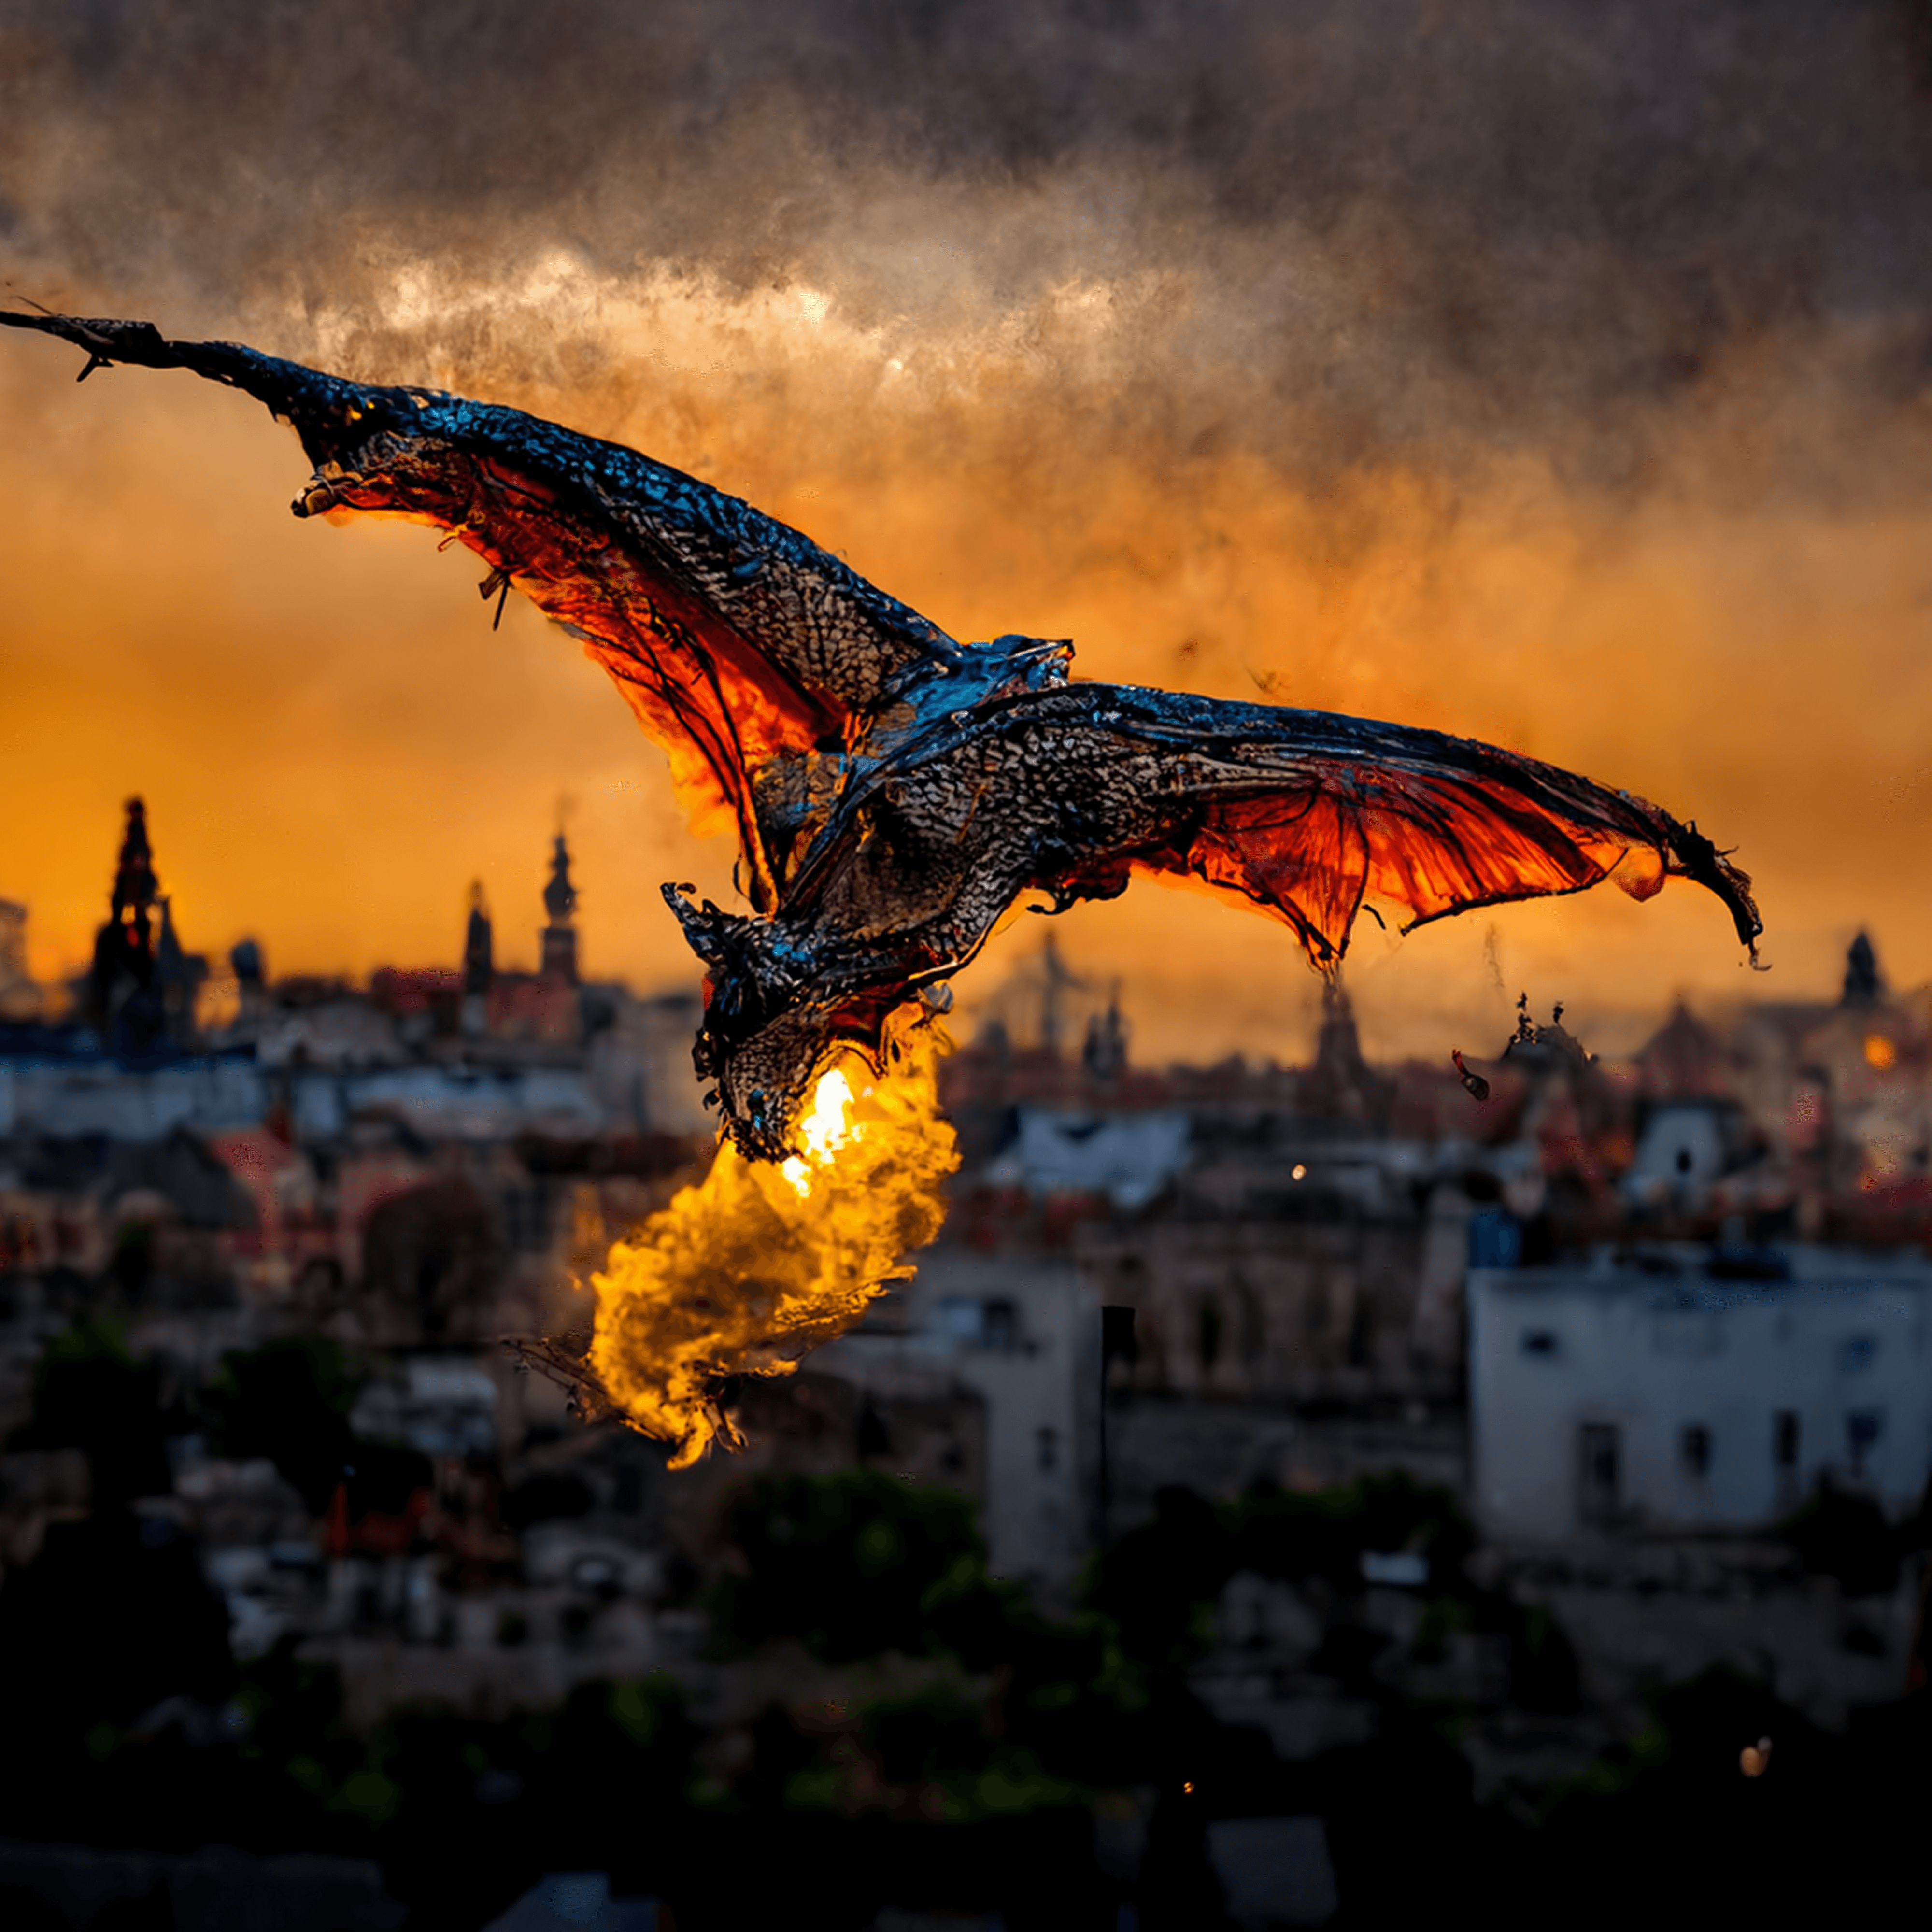 Fire Breathing Dragon over Medieval City AI Art 1/1 created by Sollog